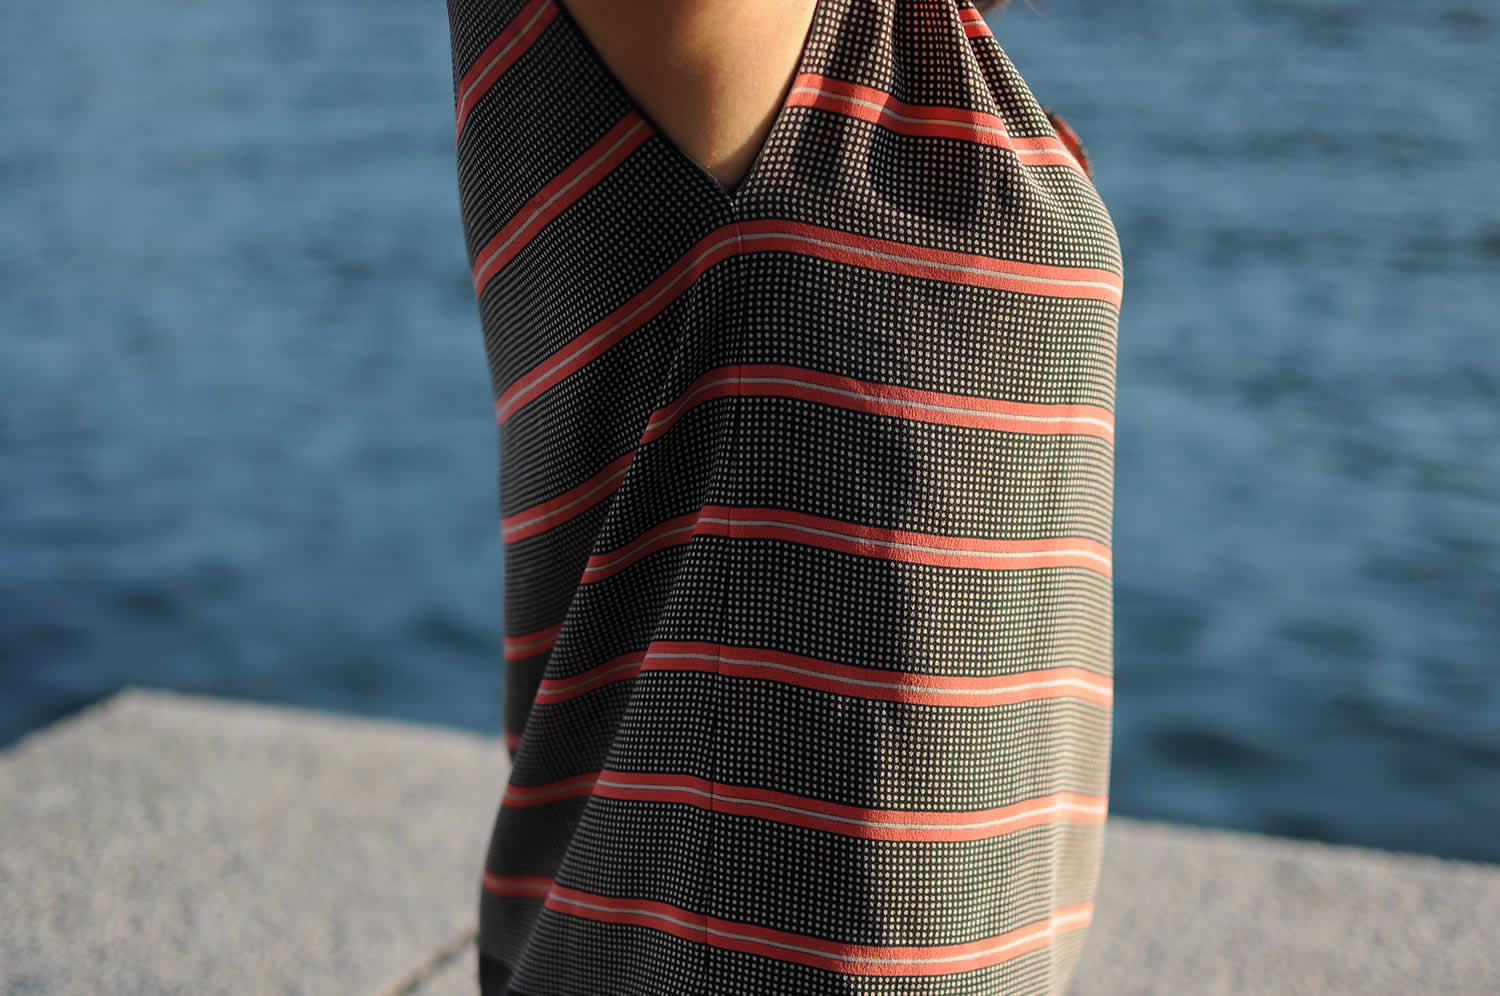 Ladulsatina sewing blog - Blog di cucito | blouse in vintage fabric - lined stripes detail